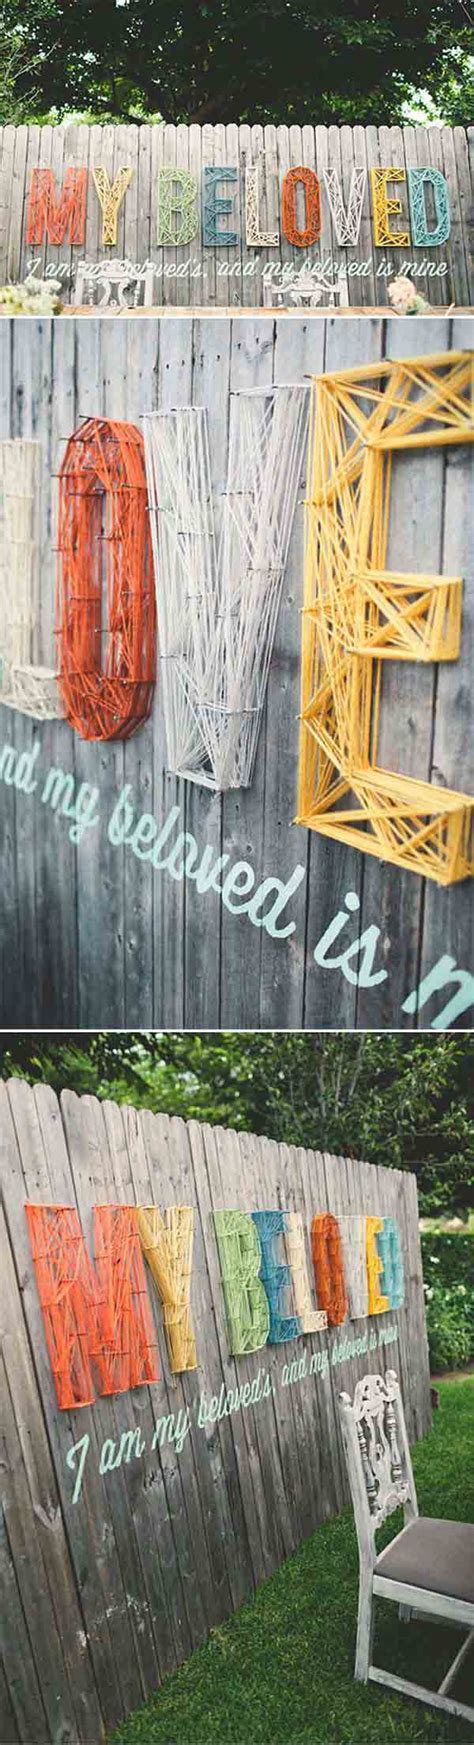 Top 23 Surprising Diy Ideas To Decorate Your Garden Fence Amazing Diy Interior And Home Design